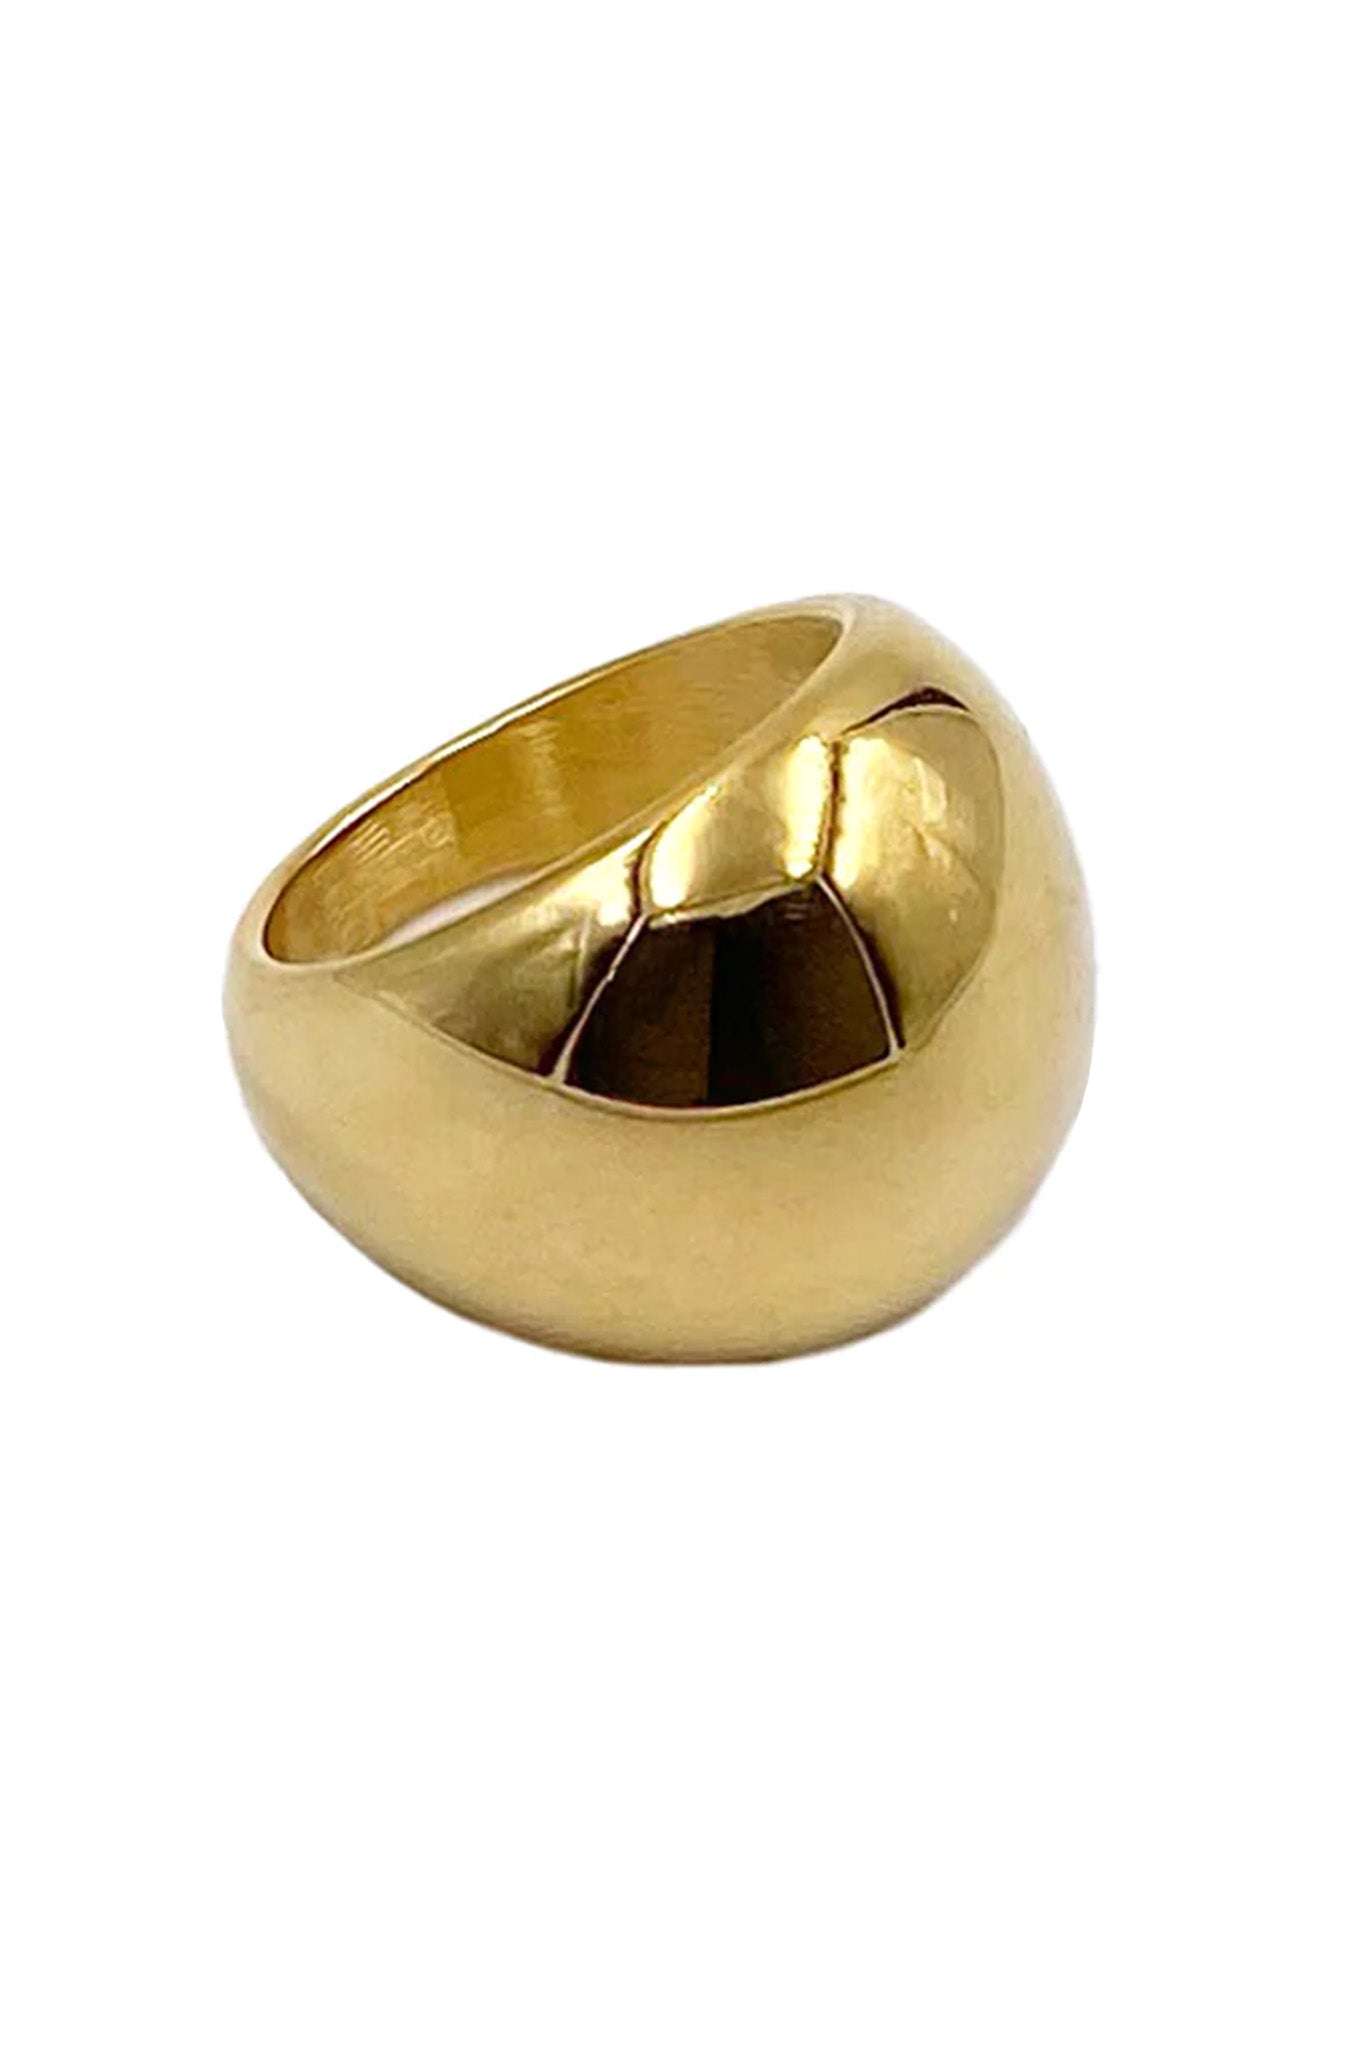 Buy 18K Gold Plated Bold Dome Ring, Band Ring, Stackable Ring, Women  Instagram Minimalist Style Two Styles Online in India - Etsy